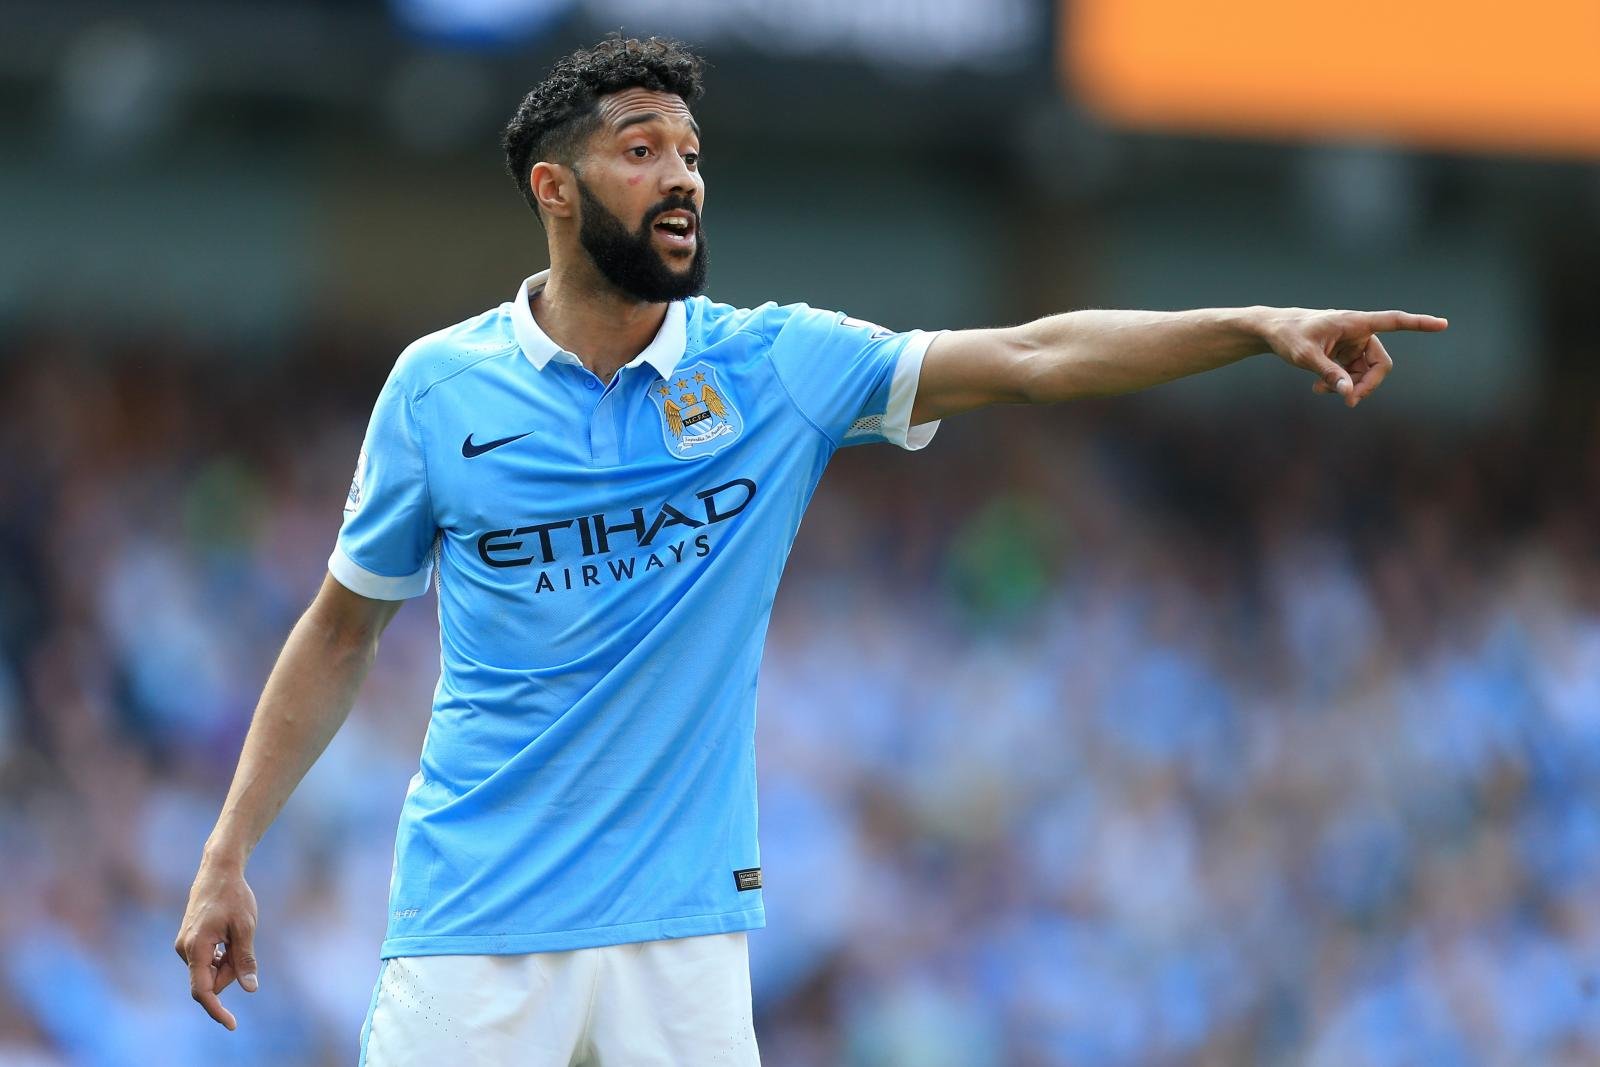 Clichy is open to offers